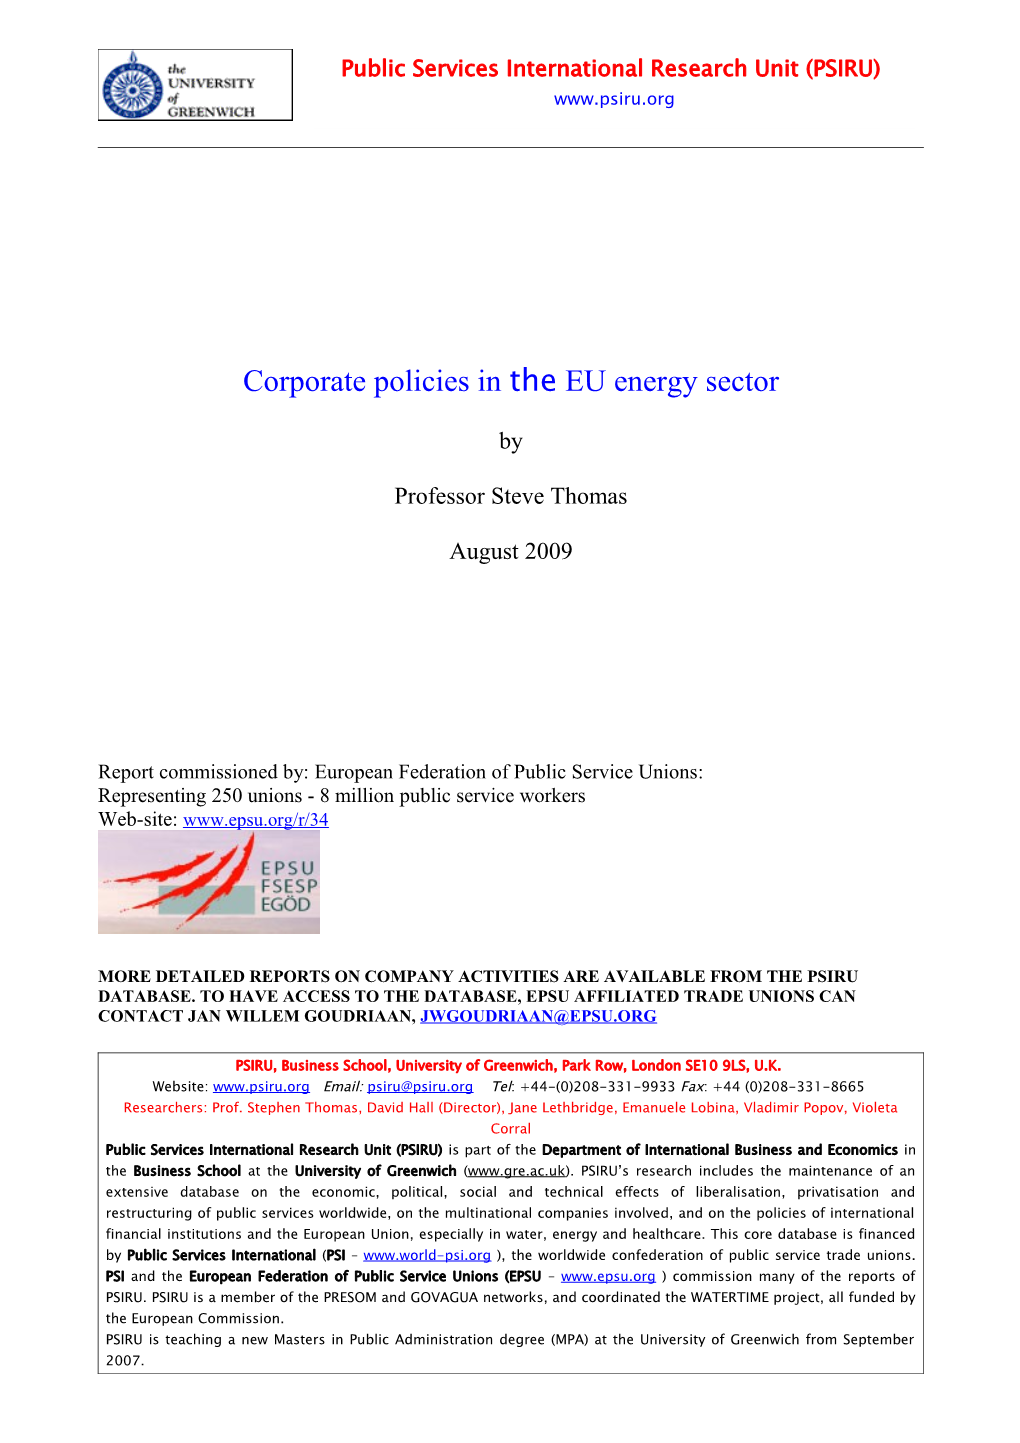 Corporate Policies in the EU Energy Sector